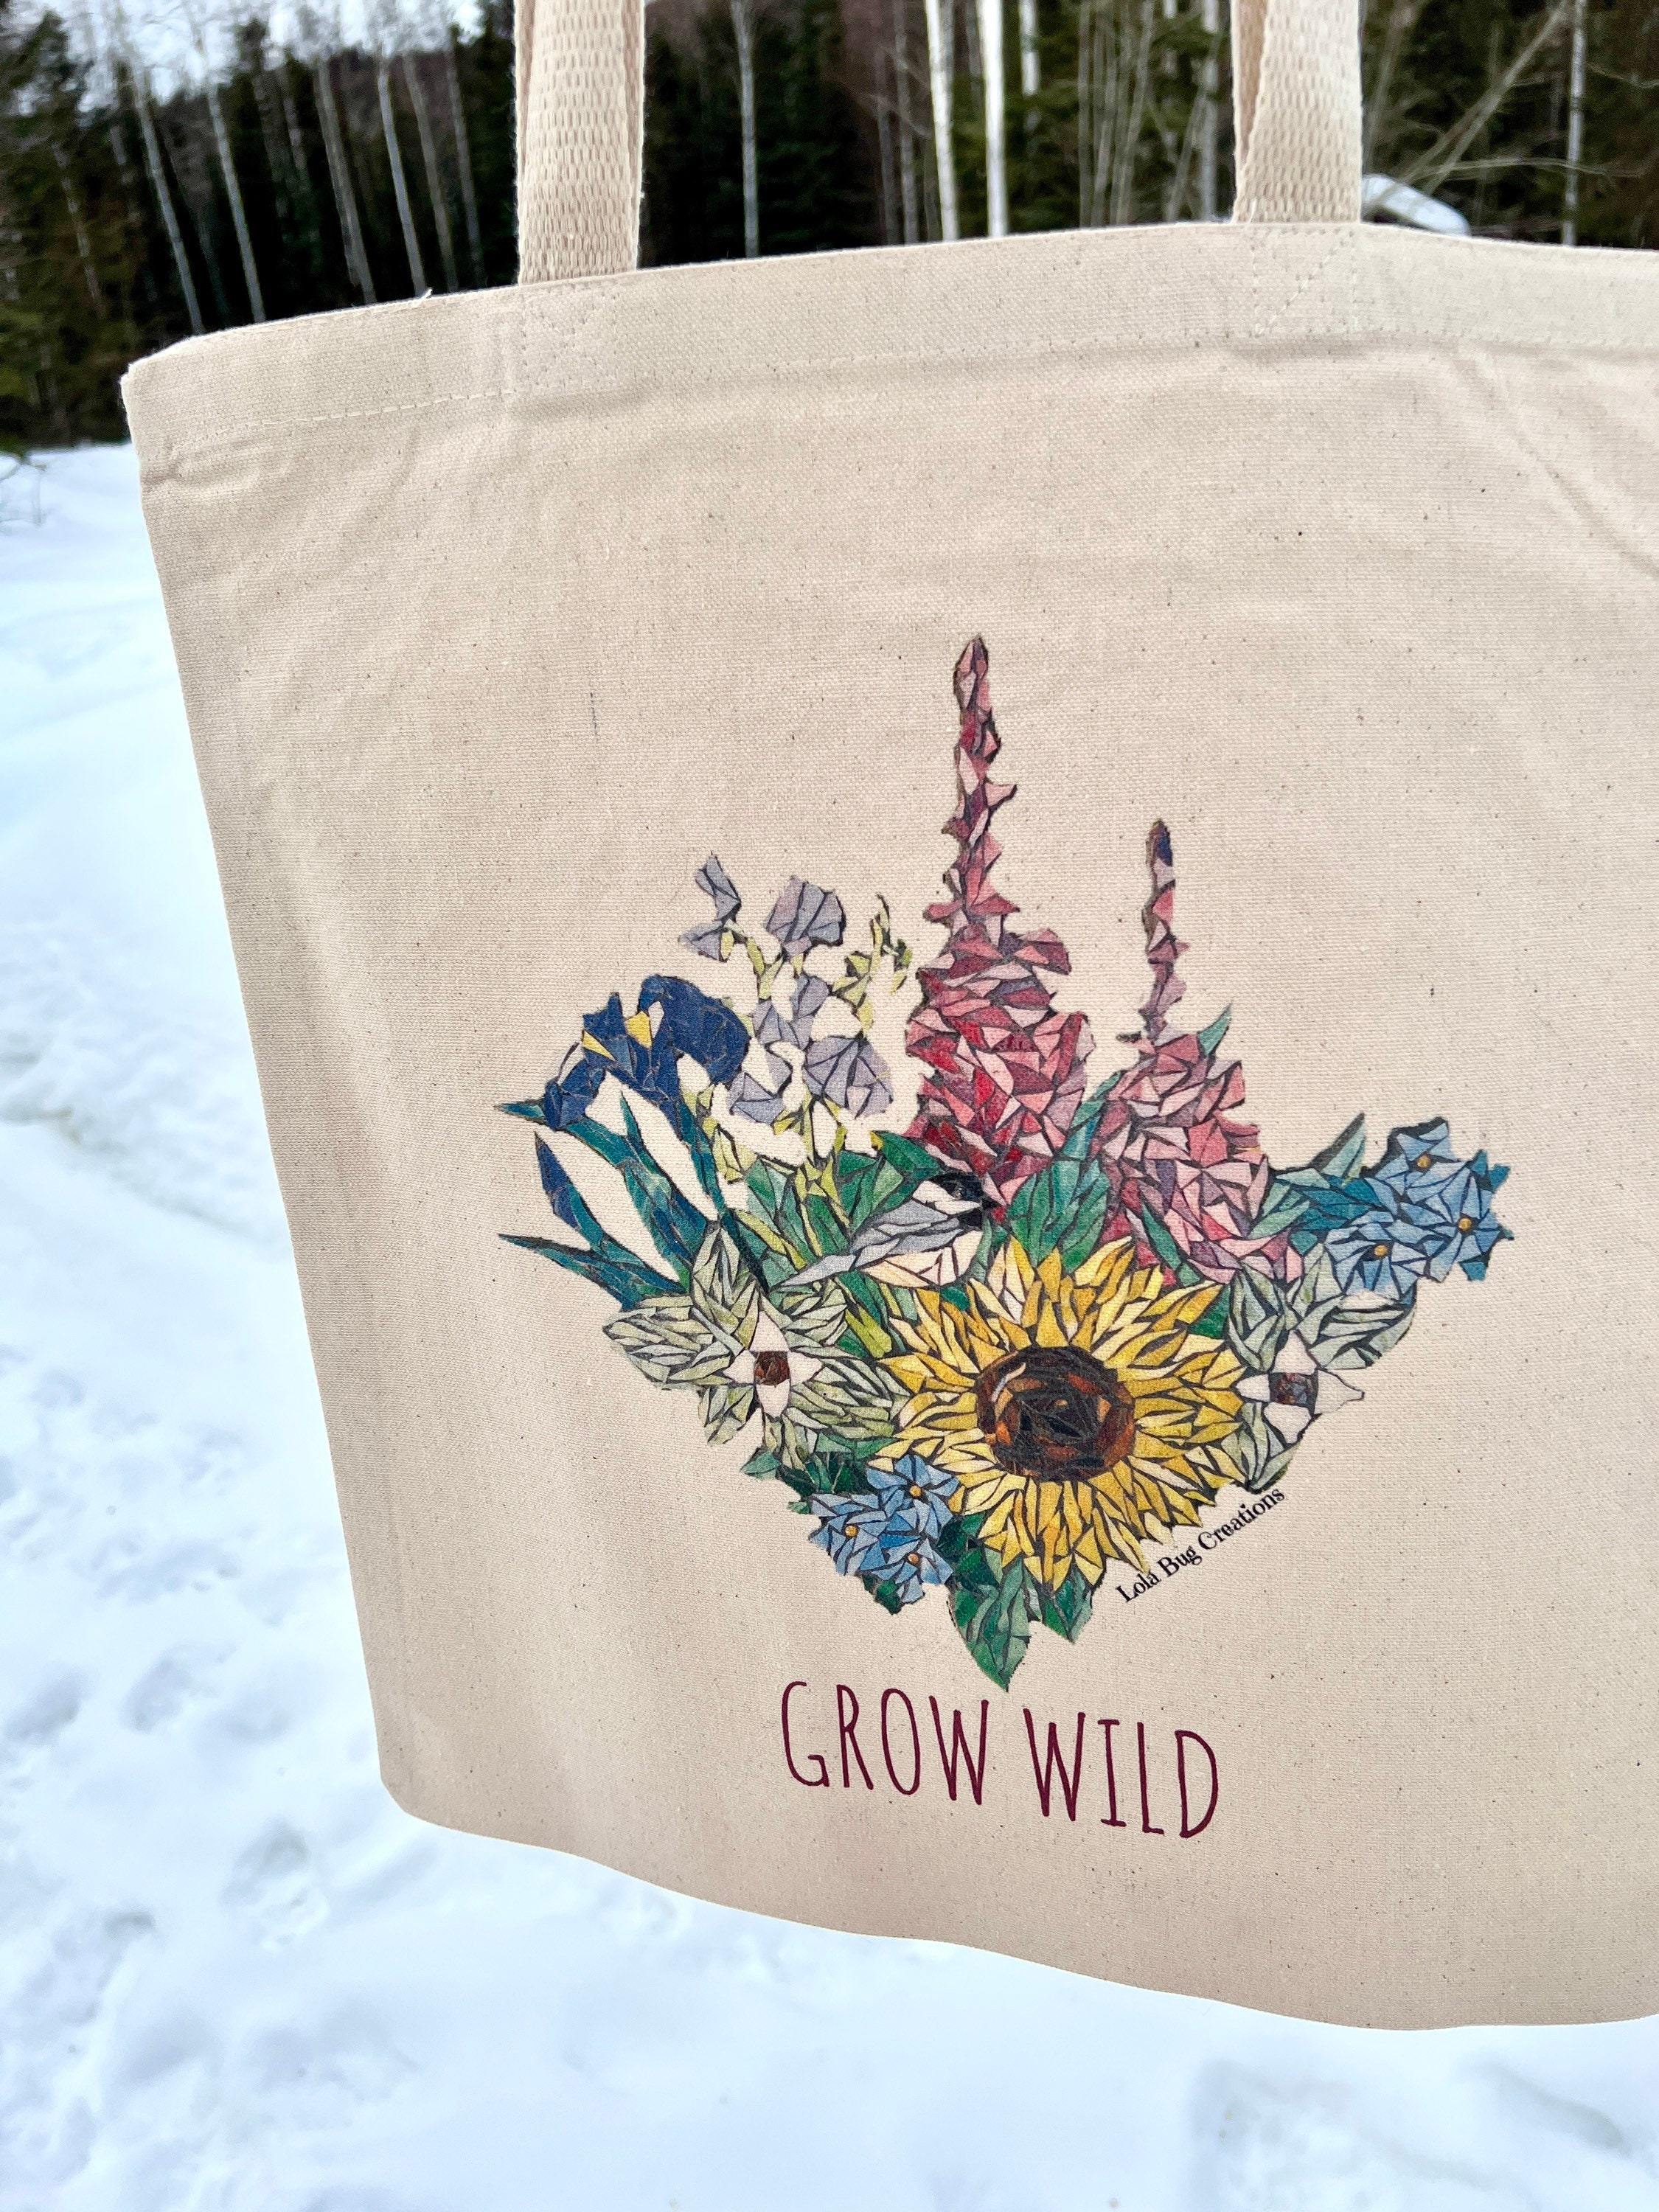 Canvas Tote Bags (Printed in Alaska!) – Trickster Company